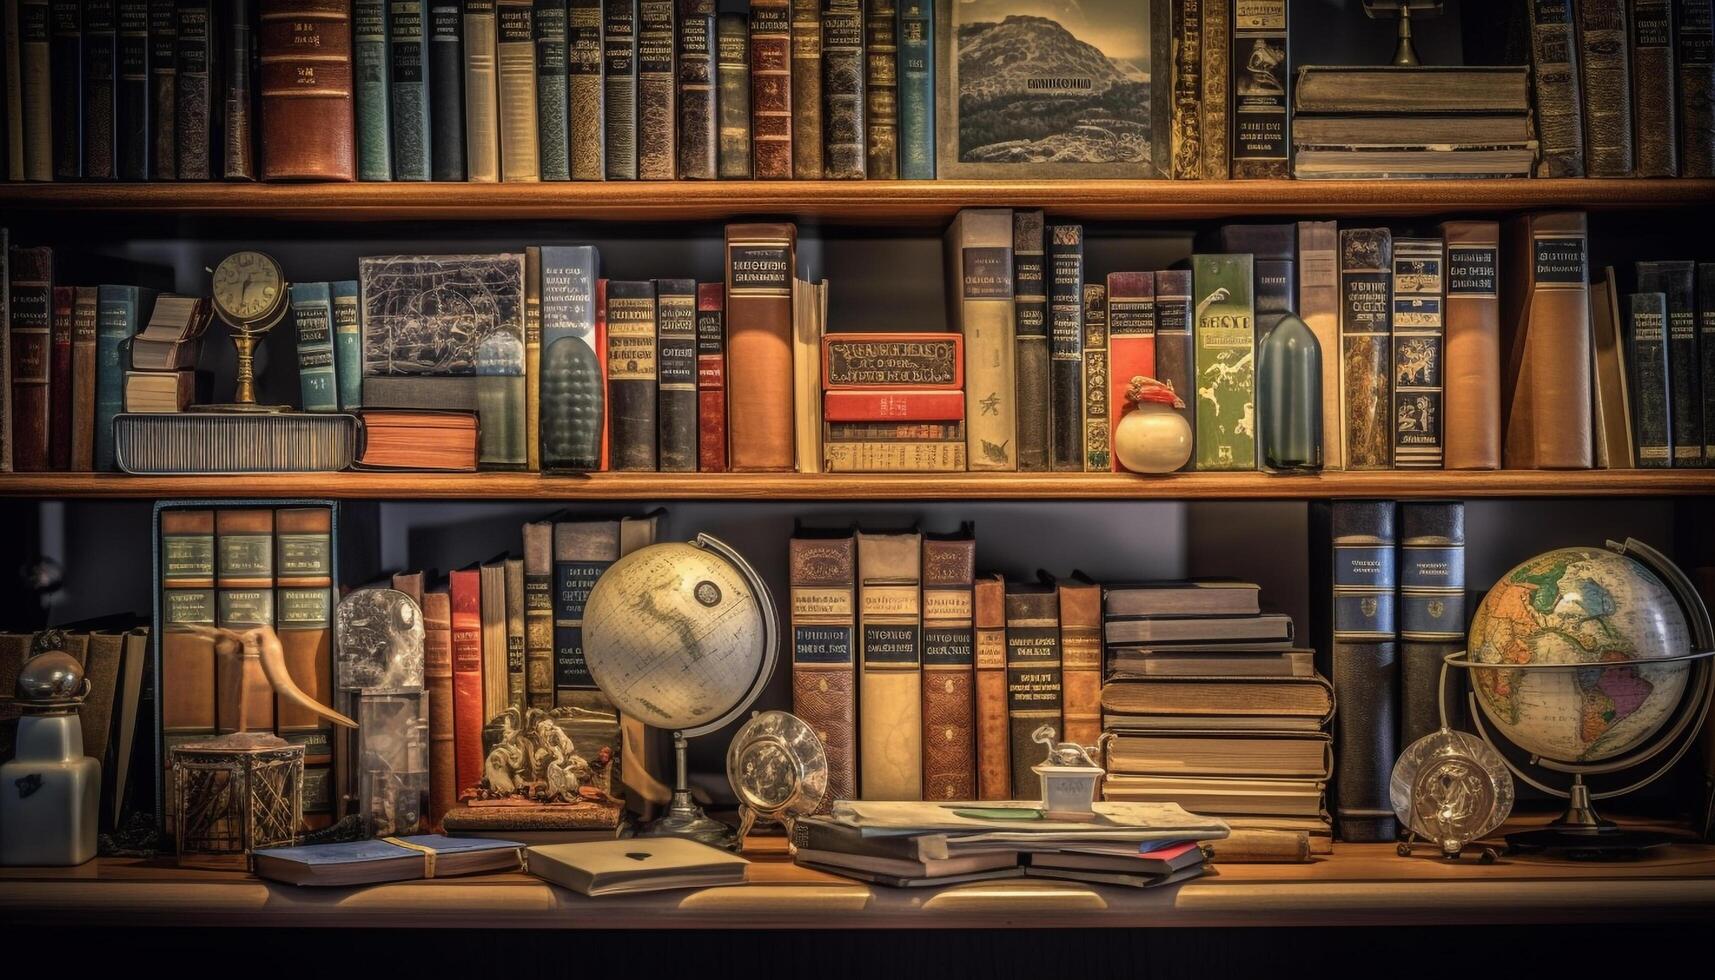 A dusty old bookshelf holds an abundance of ancient wisdom generated by AI photo